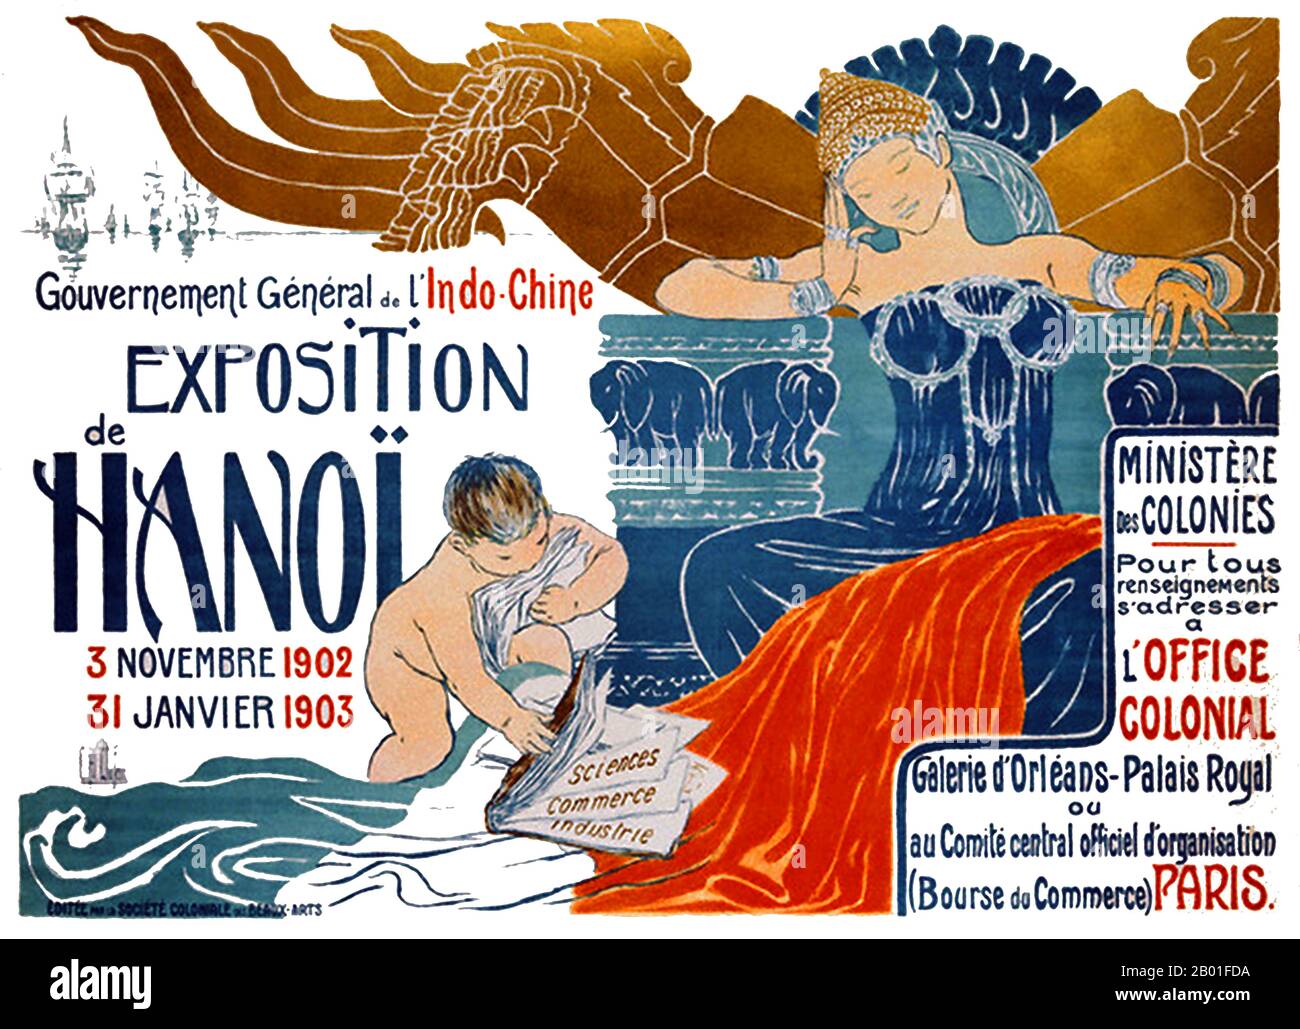 Vietnam: Advertisement for the Hanoi Exposition by Clementine-Hélène Dufau (18 August 1869 - 18 March 1937), November 1902 - January 1903.  Hanoi (Vietnamese: Hà Nội), is the capital of Vietnam and the country's second largest city. It has an estimated population of nearly 6.5 million (2009), (but only 2.6 million (2009) in urban areas). From 1010 until 1802, it was the most important political centre of Vietnam.  It was eclipsed by Huế during the Nguyễn dynasty as the capital of Vietnam, but Hanoi served as the capital of French Indochina from 1902 to 1954. Stock Photo